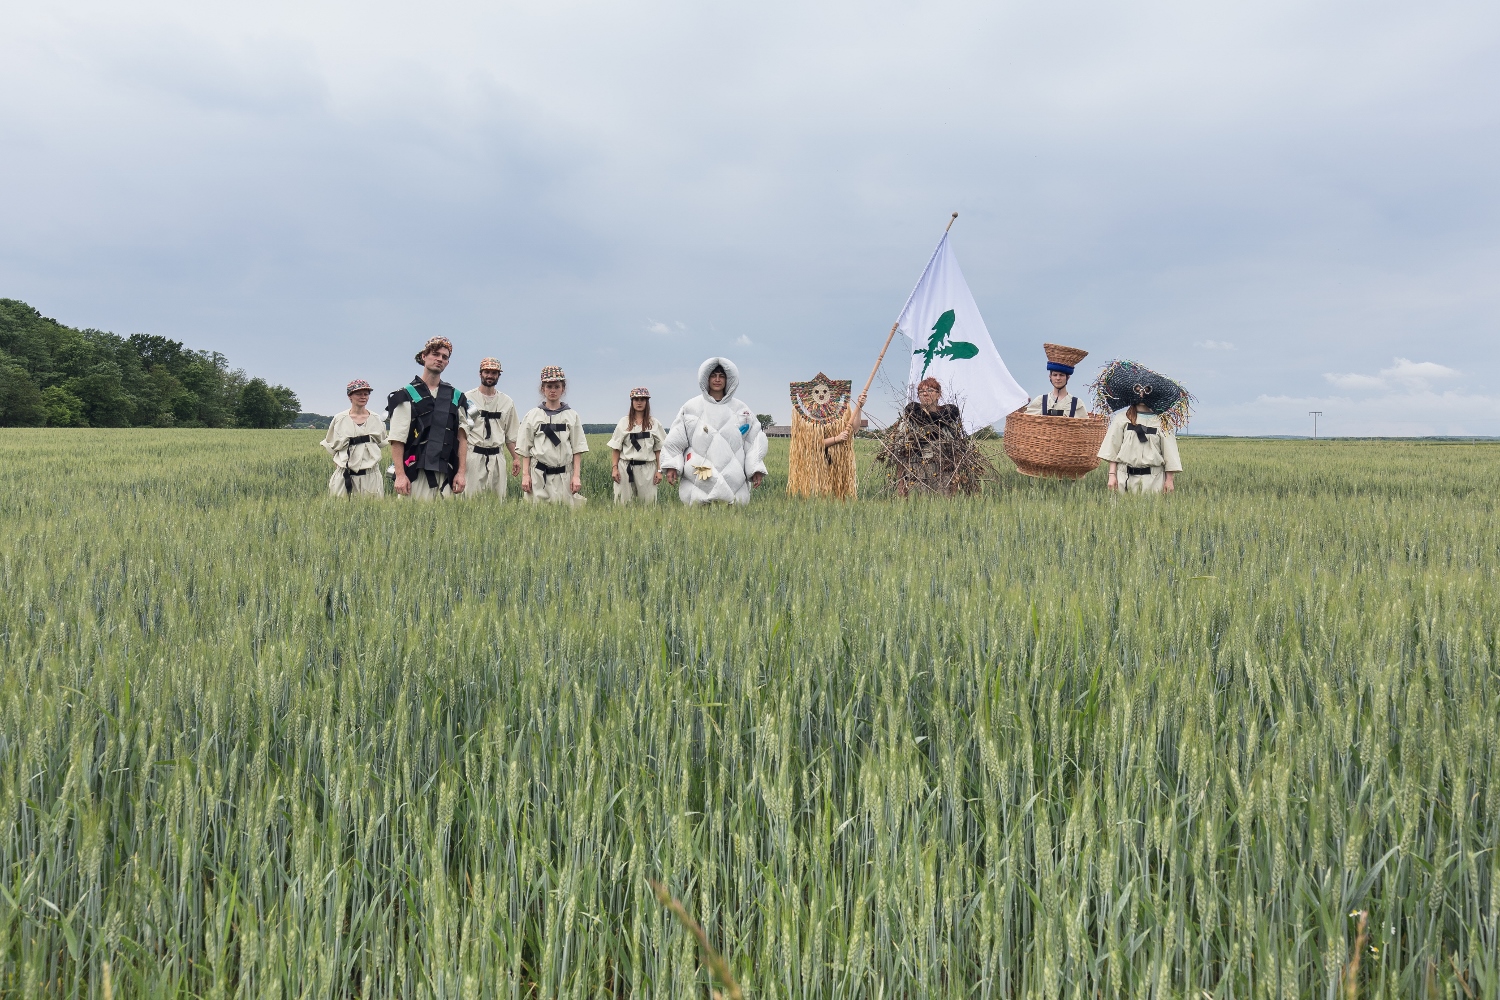 BIO 25's Countryside Reloaded project in the Pannonian village of Genterovci drew attention to the importance of the understanding of modern food production and consumption processes